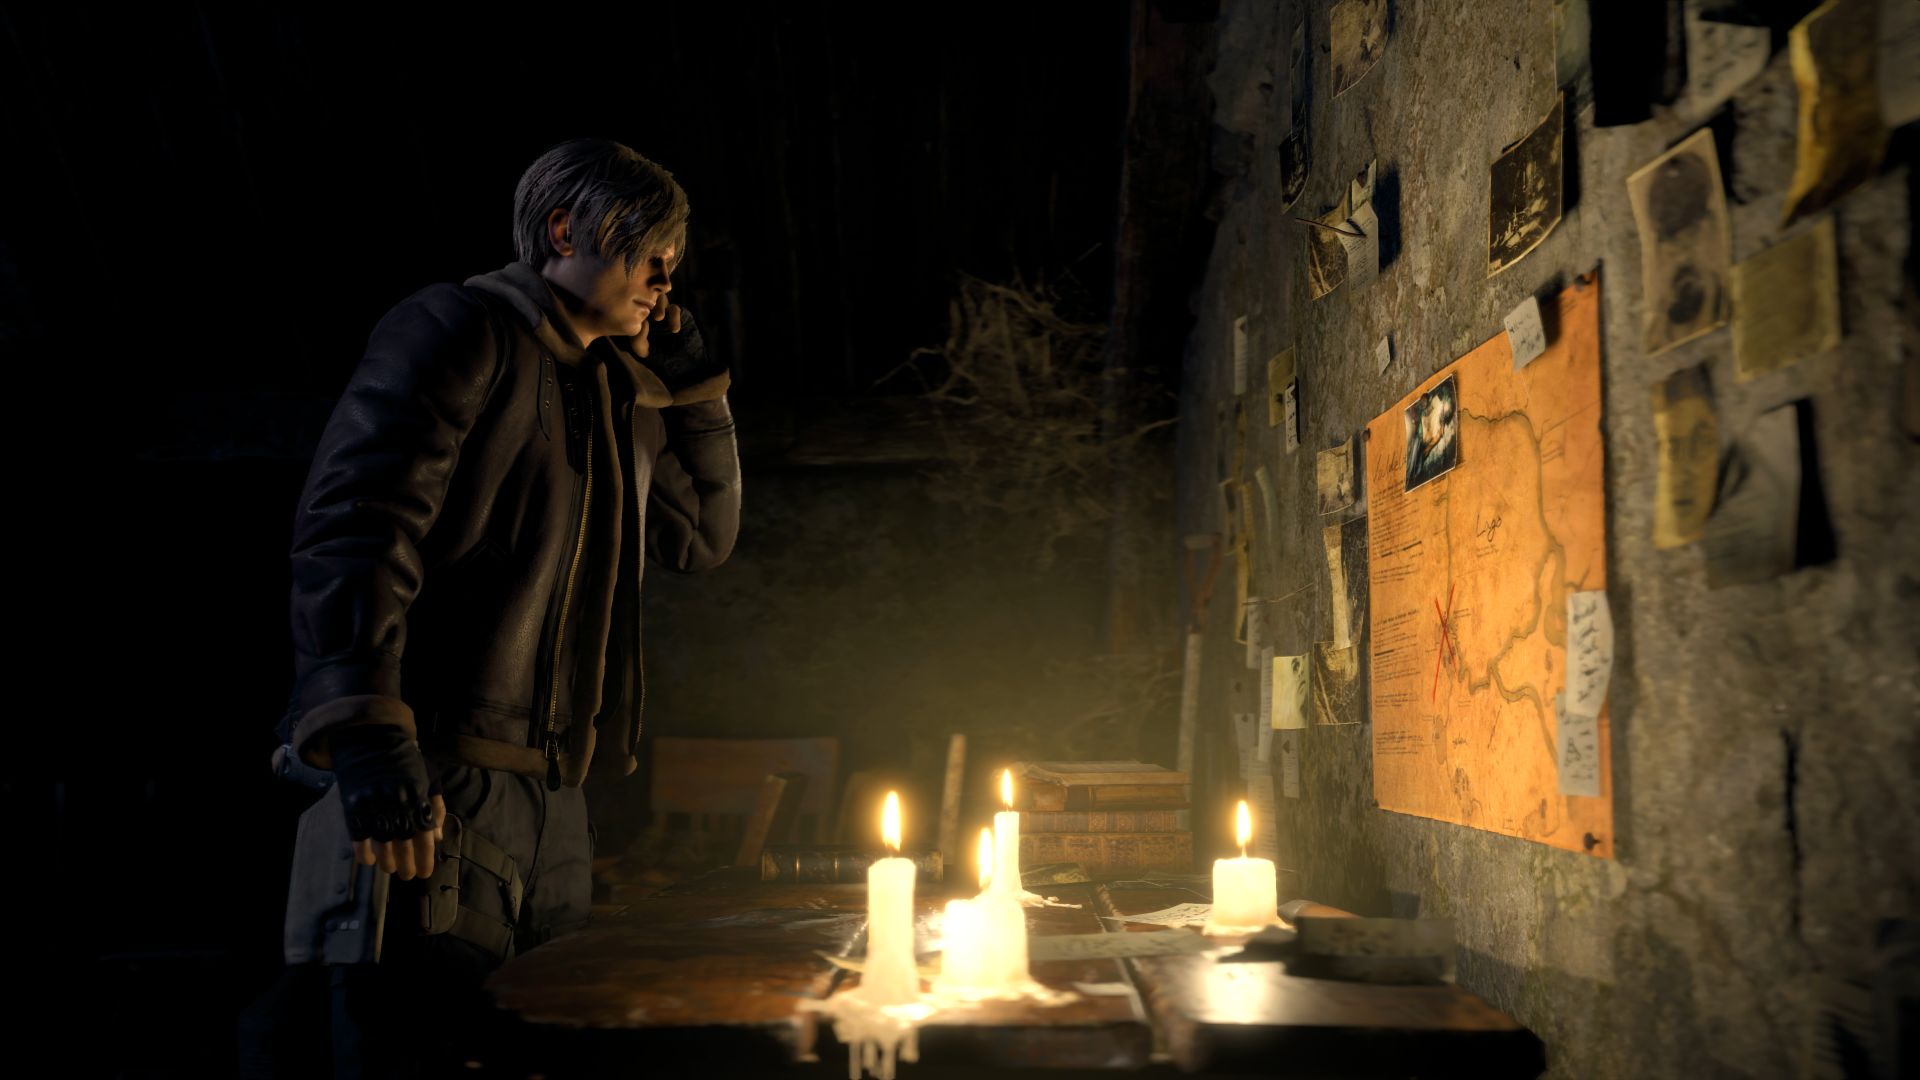 Resident Evil 4’s remake retreads old ground in style, but feels too familiar